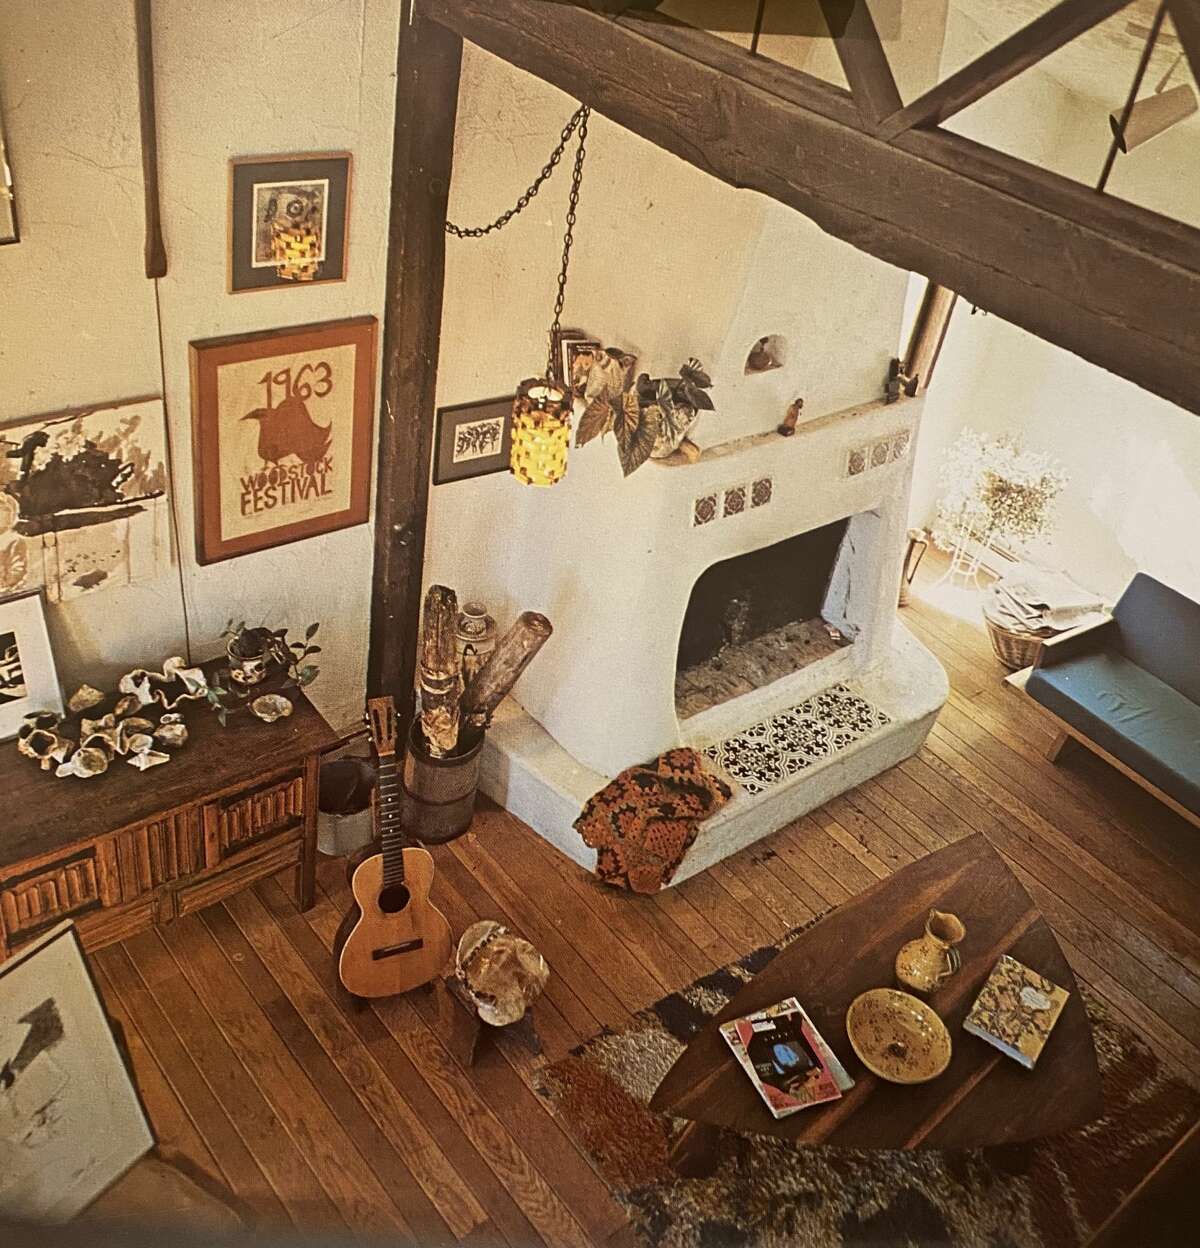 Furniture maker Stephen Robin made his first handmade house, pictured here, in 1970. A visit to Santa Fe inspired the fireplace. He sold it in 1989 for $189,000, and estimates that the second, most recent owner paid roughly $800,000 for the four-bedroom house. He still lives in Woodstock in a new, more modern handmade house, and continues to make custom furniture in his studio on Route 212. 